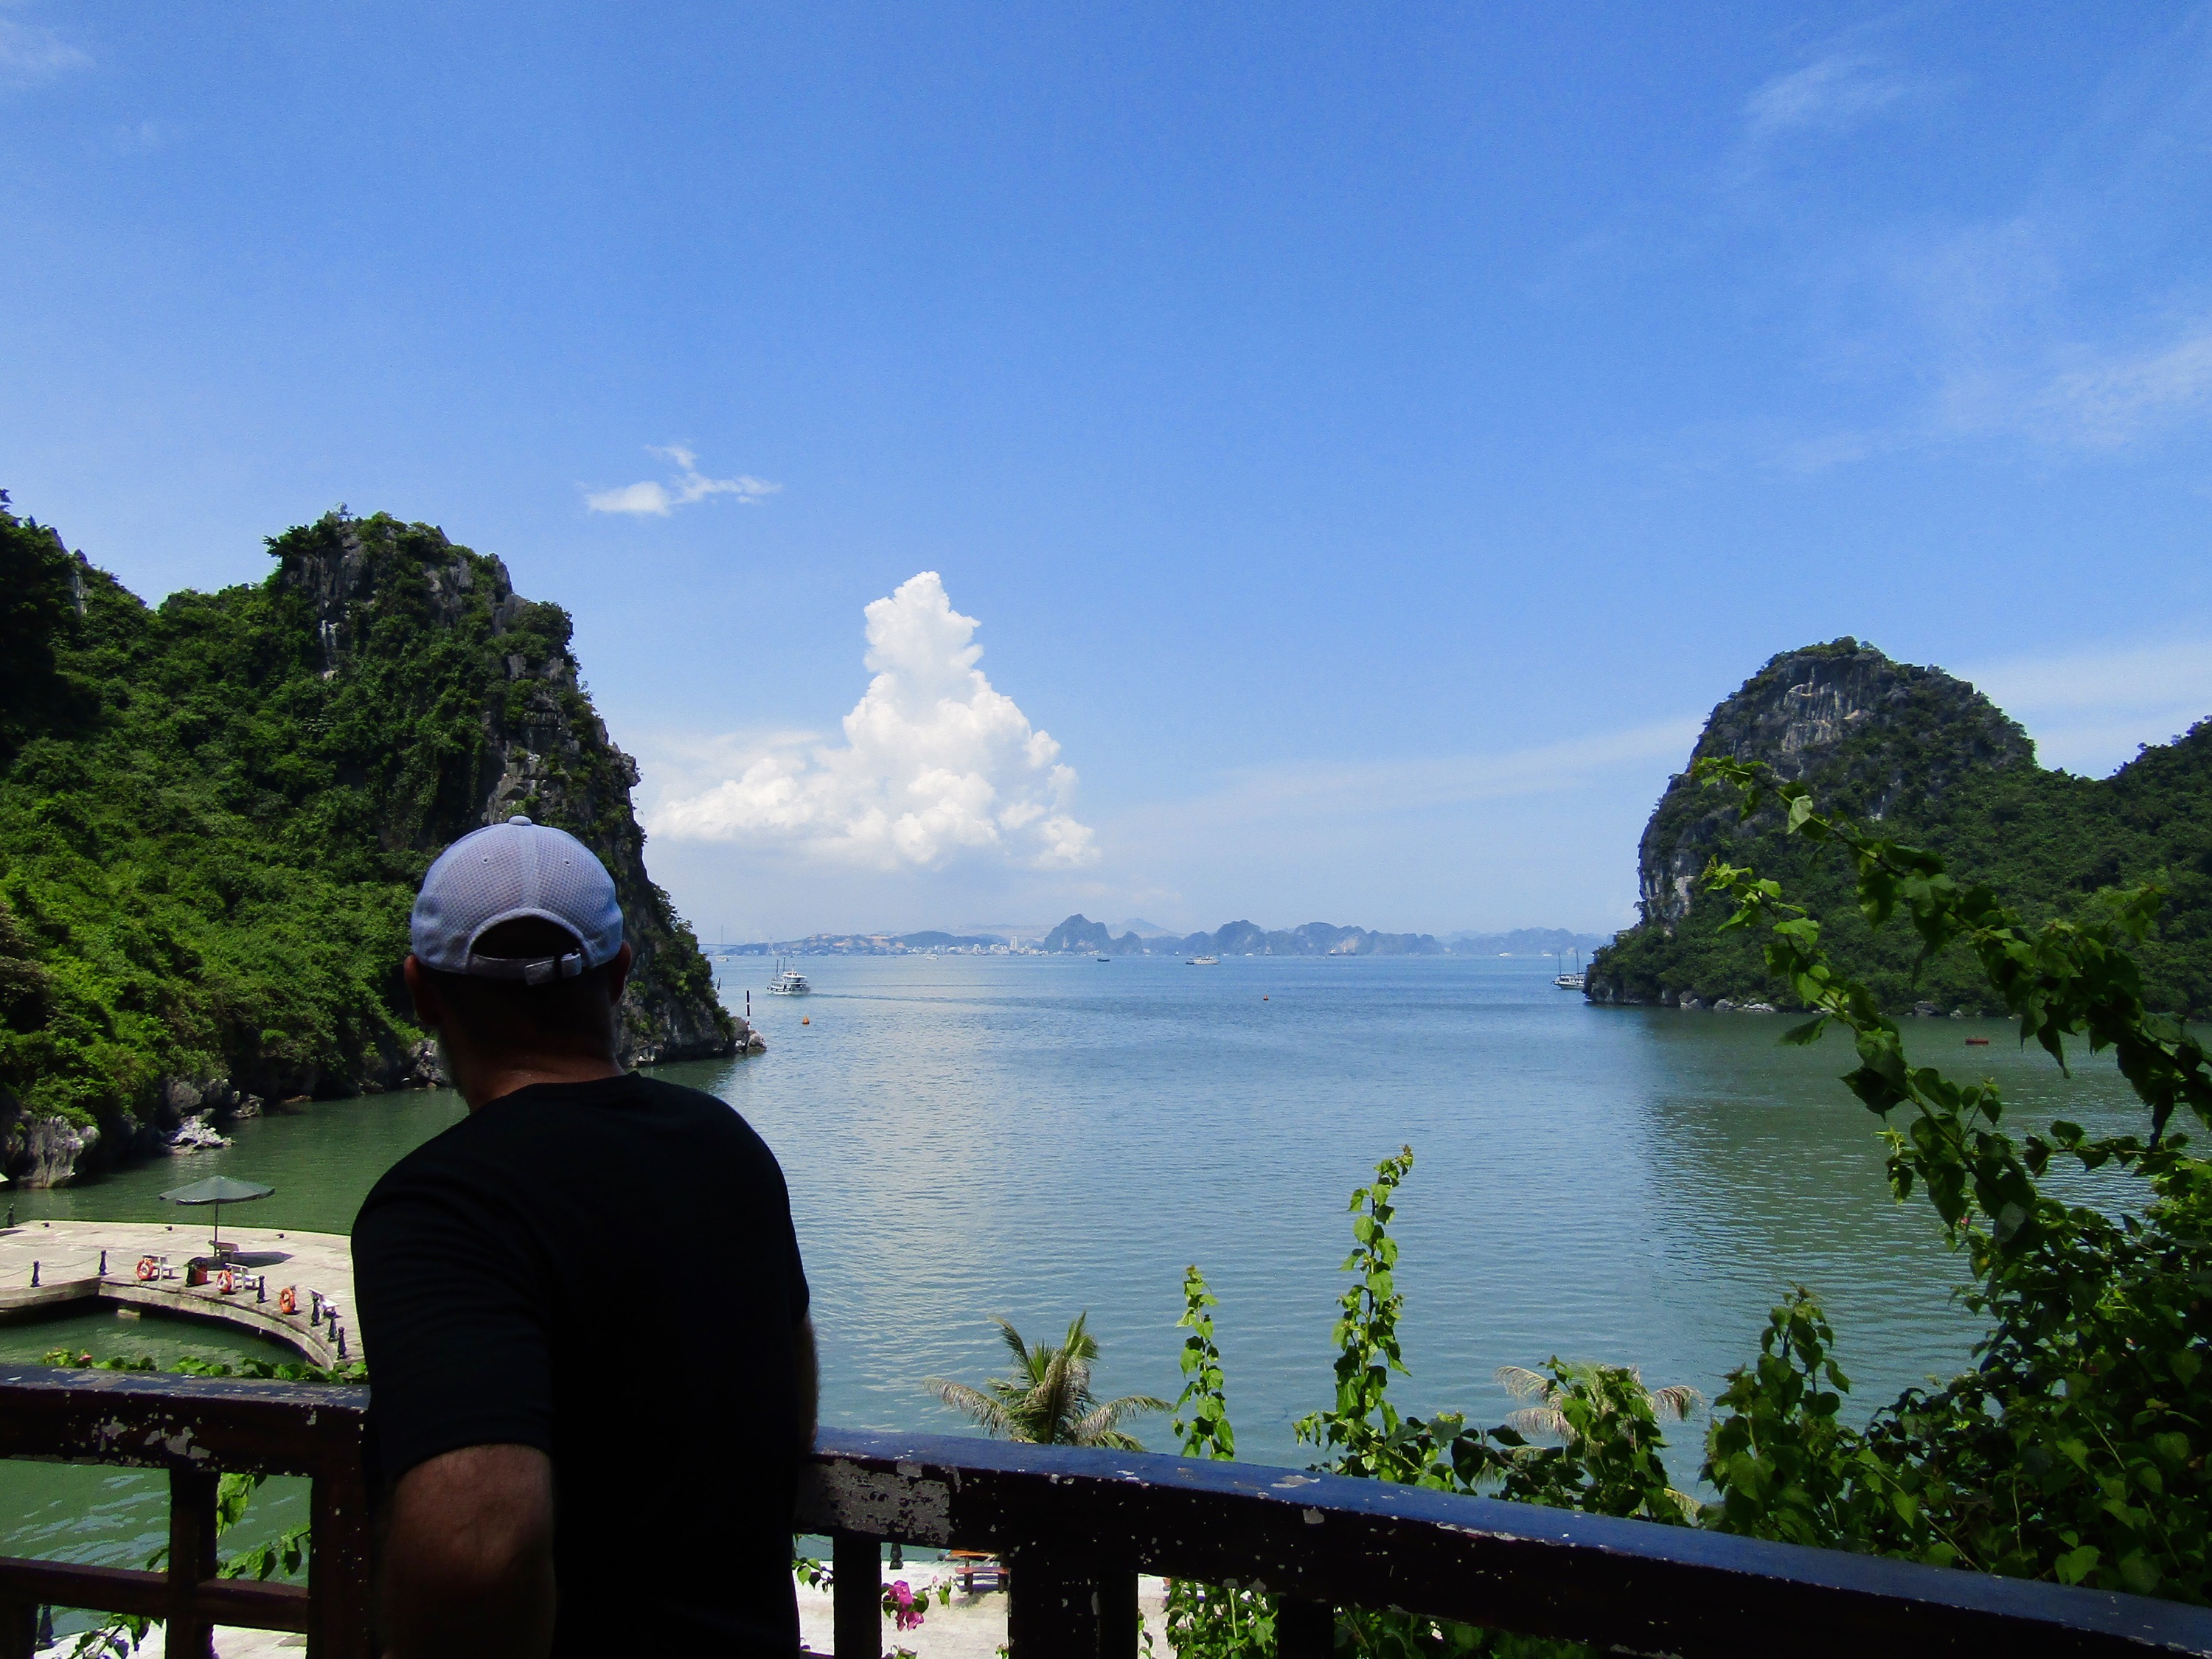 Immediately upon arriving in Halong City, we boarded a boat and set course for a harbor on Bo Hon Island. The view back to the city over the Gulf of Tonkin was magnificent.